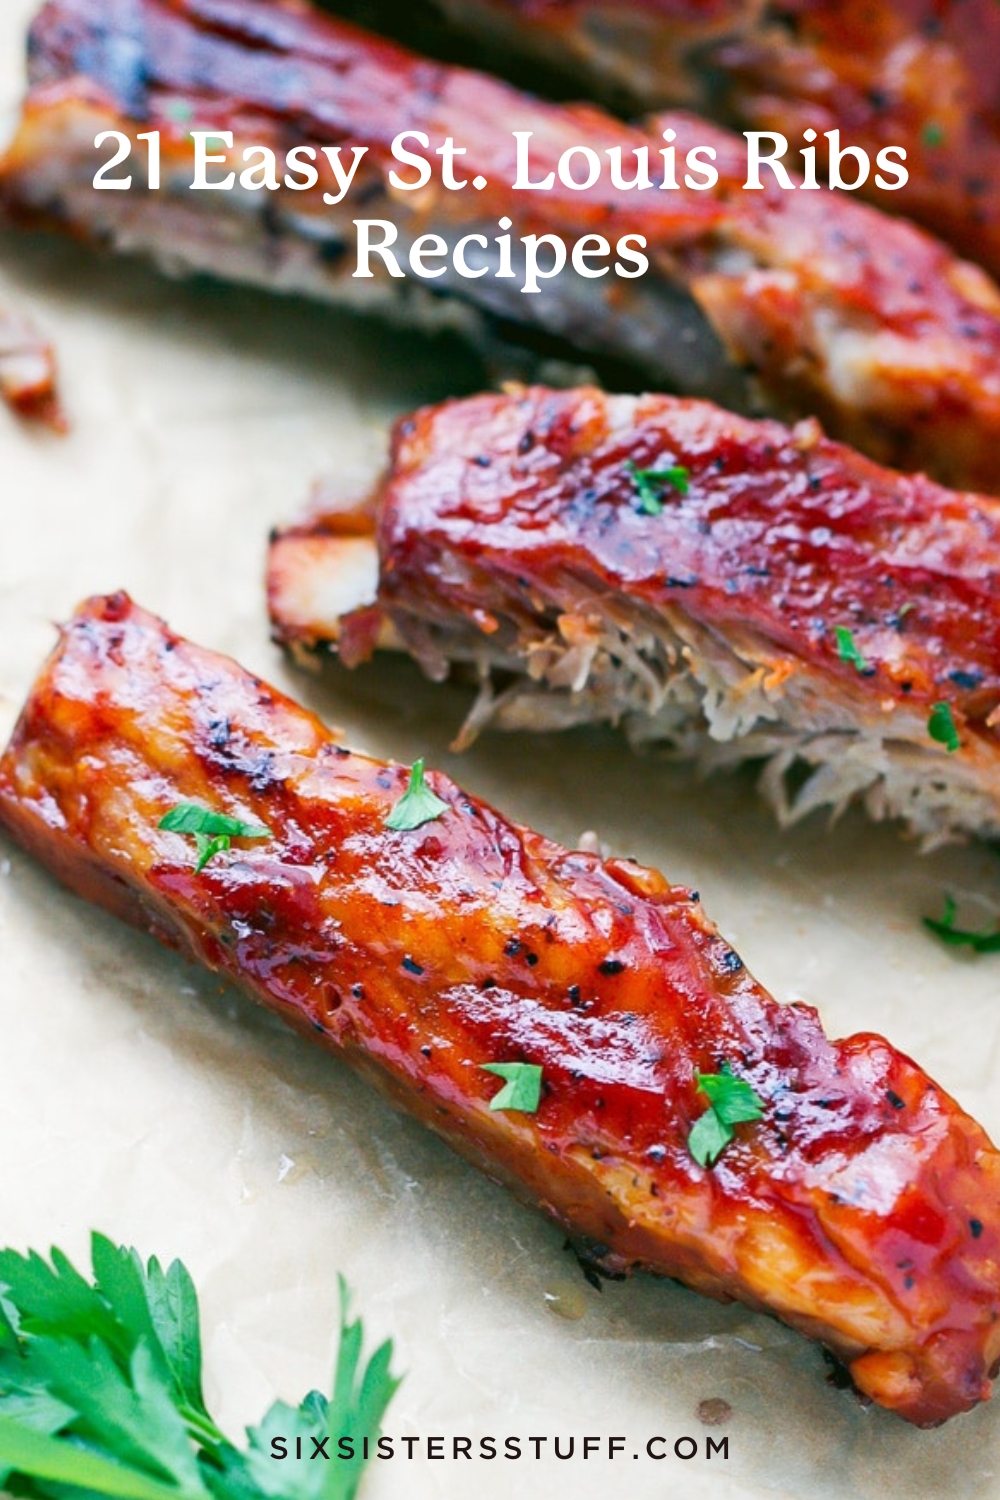 Easy and Quick Grilled Foil-Wrapped Ribs - With Peanut Butter on Top